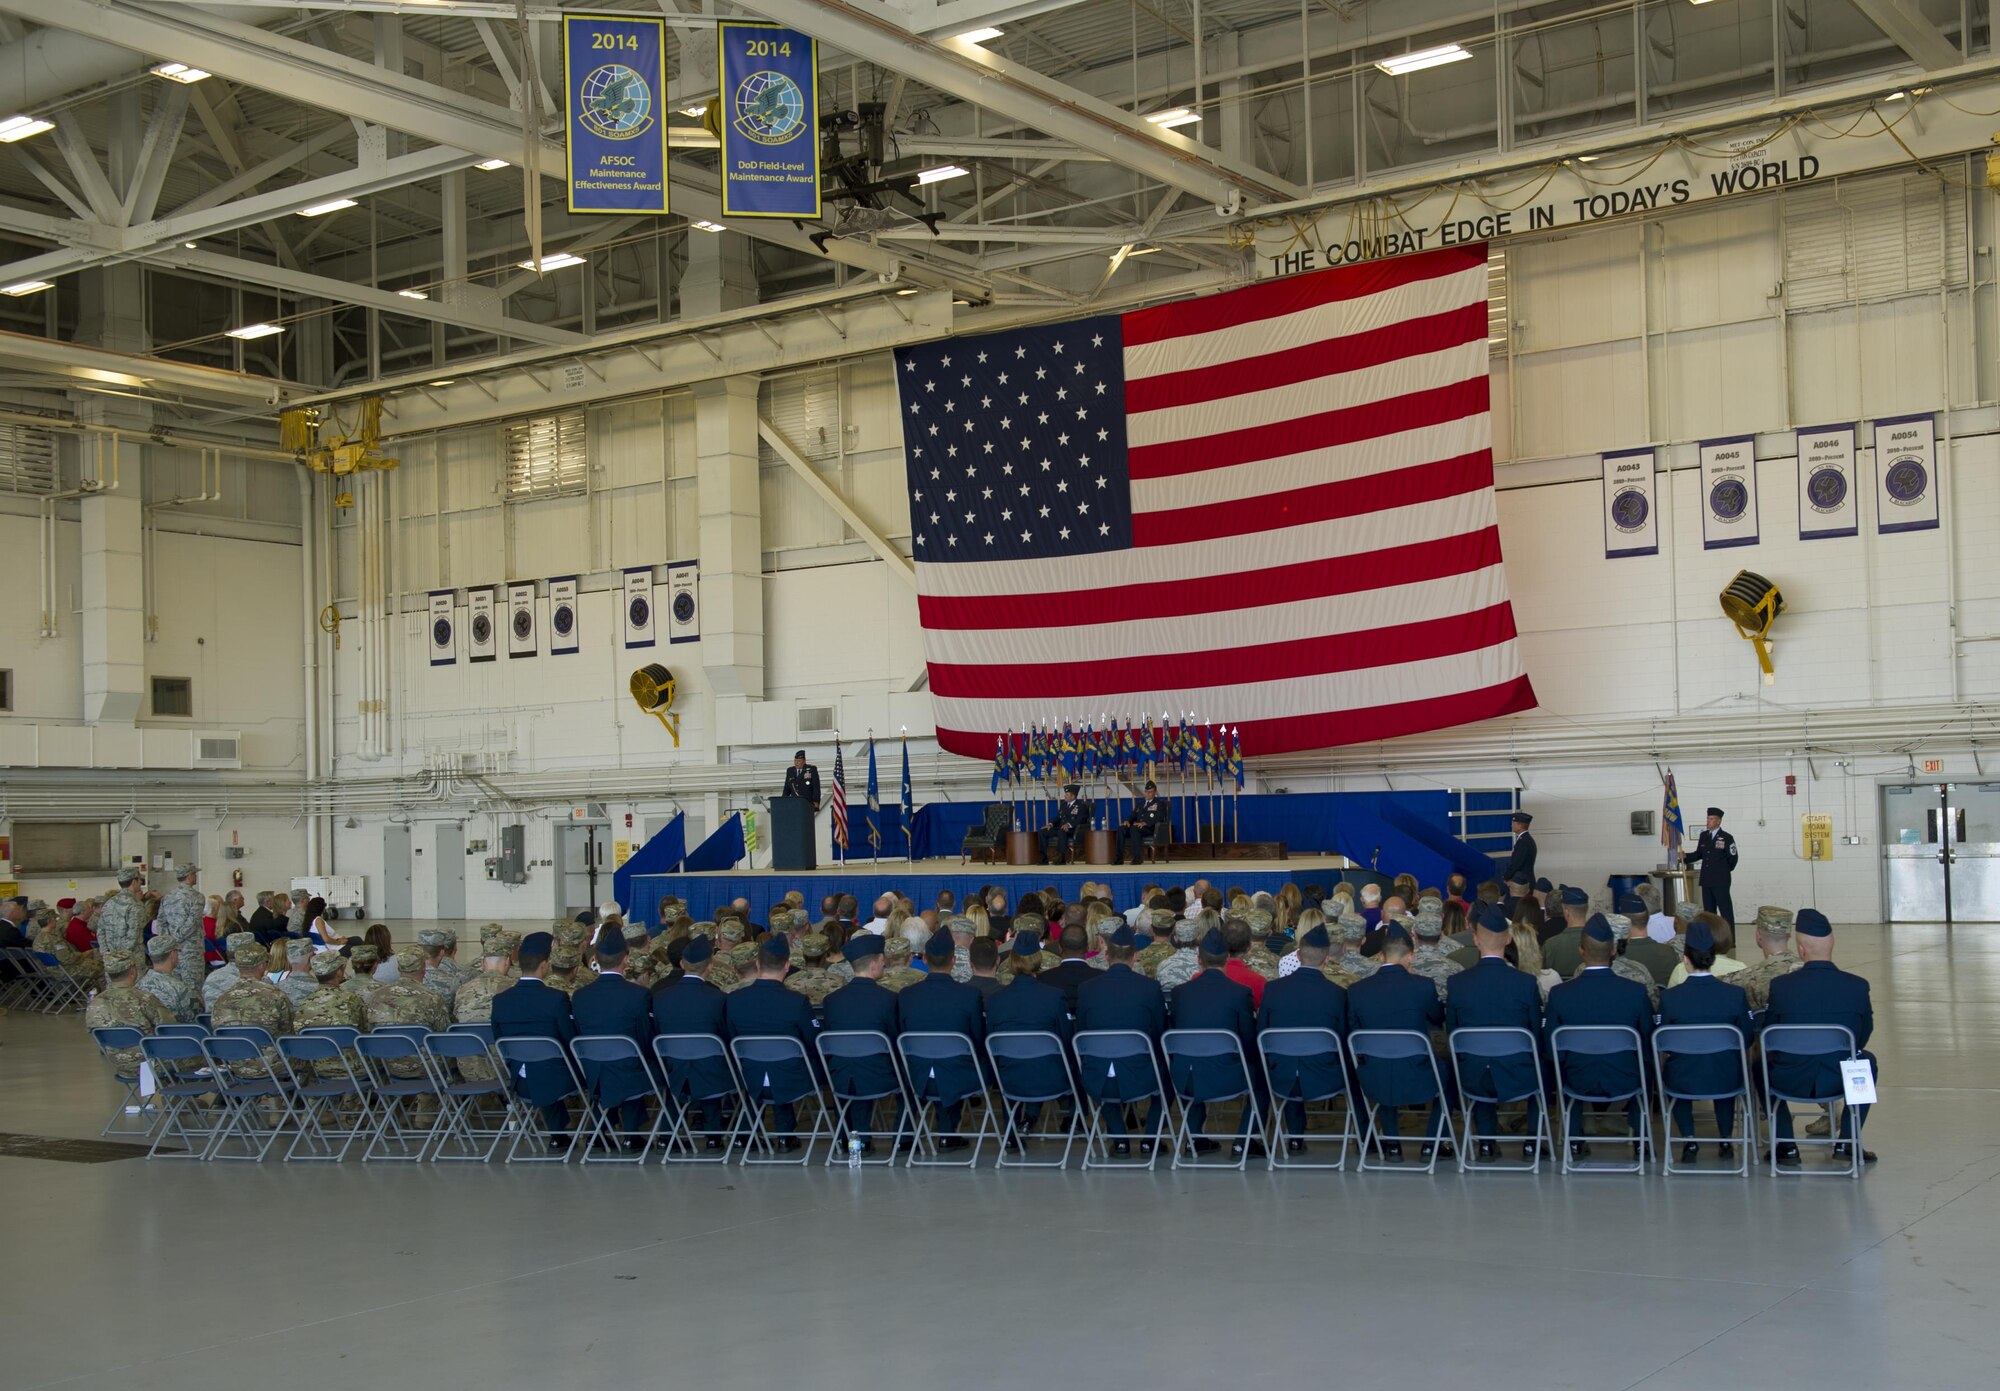 Lt. Gen. Brad Heithold, commander of Air Force Special Operations Command, addresses Airmen from the 1st Special Operations Wing during a change of command ceremony at Hurlburt Field, Fla., June 10, 2016. Col. Sean Farrell, former commander of the 1st SOW, relinquished command to Col. Tom Palenske, former vice commander of the 1st SOW, after commanding the wing for more than 18 months and employing more than 5,000 Air Commandos who executed 30,900 combat flight hours. (U.S. Air Force photo by Senior Airman Andrea Posey)